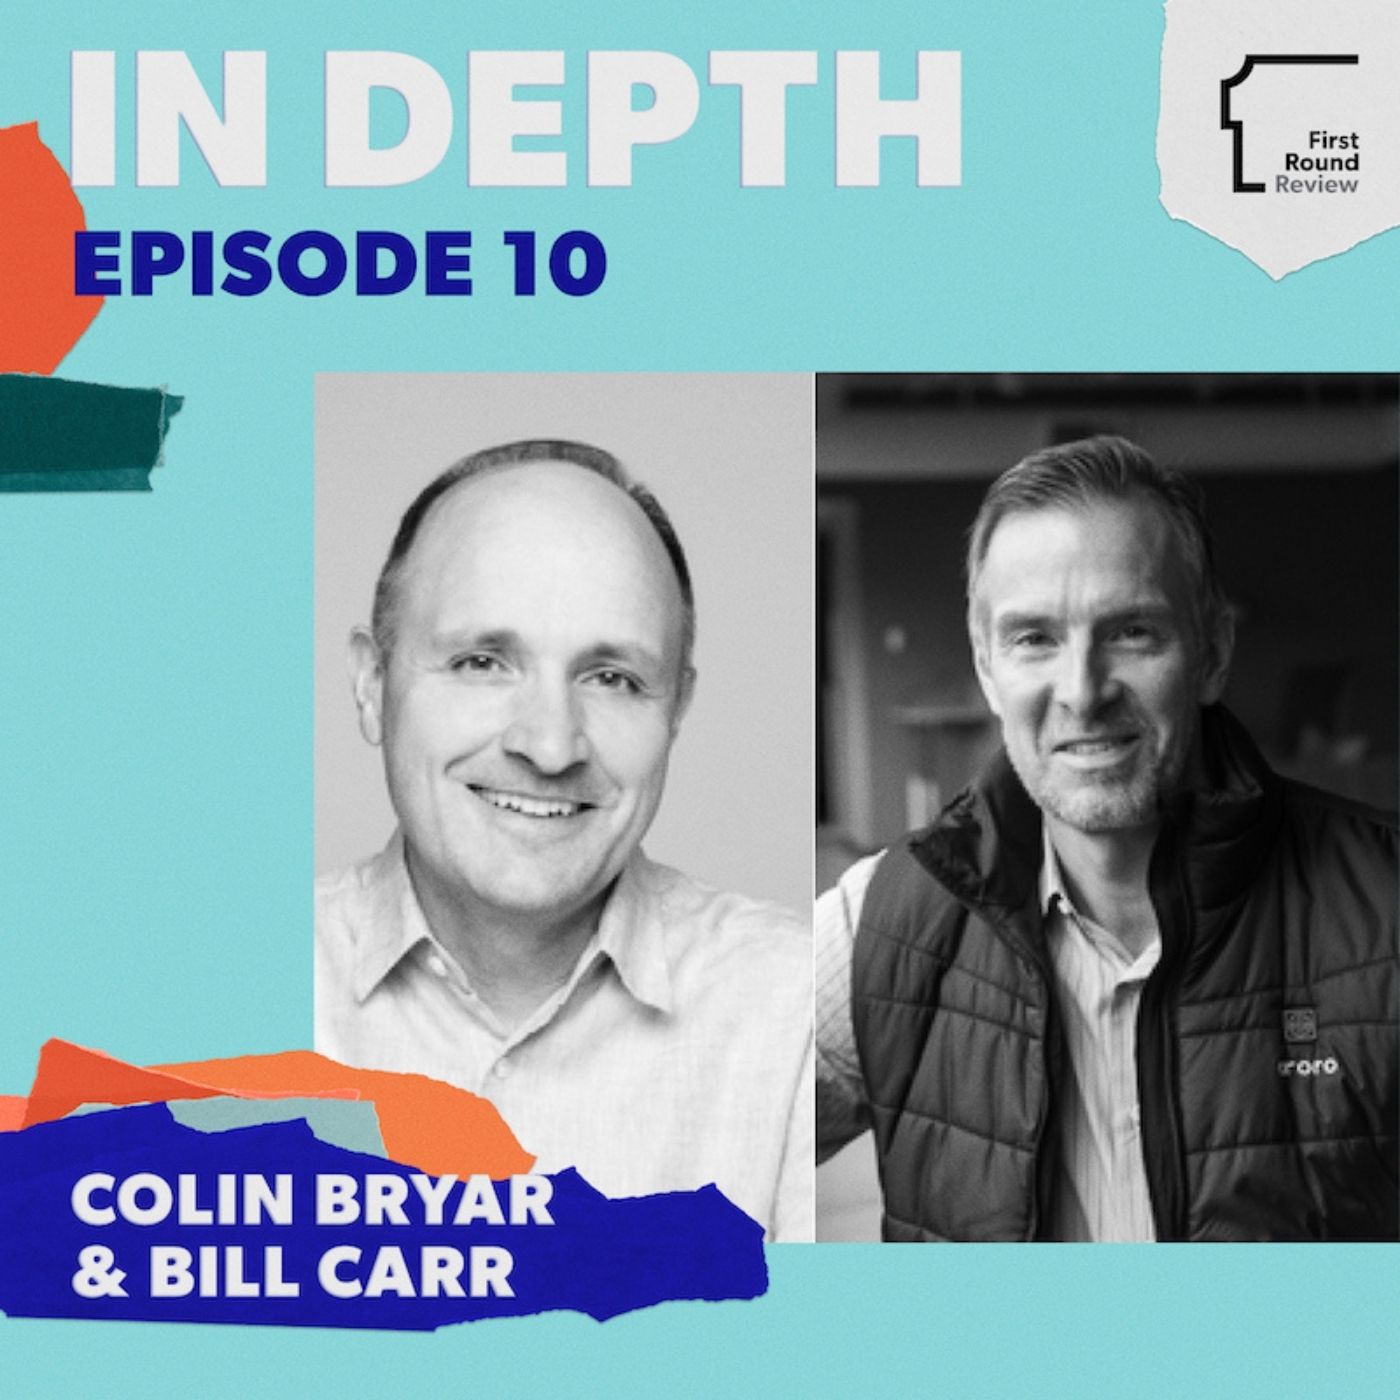 An inside look at the system that will outlast Bezos—Bill Carr & Colin Bryar on lessons from Amazon